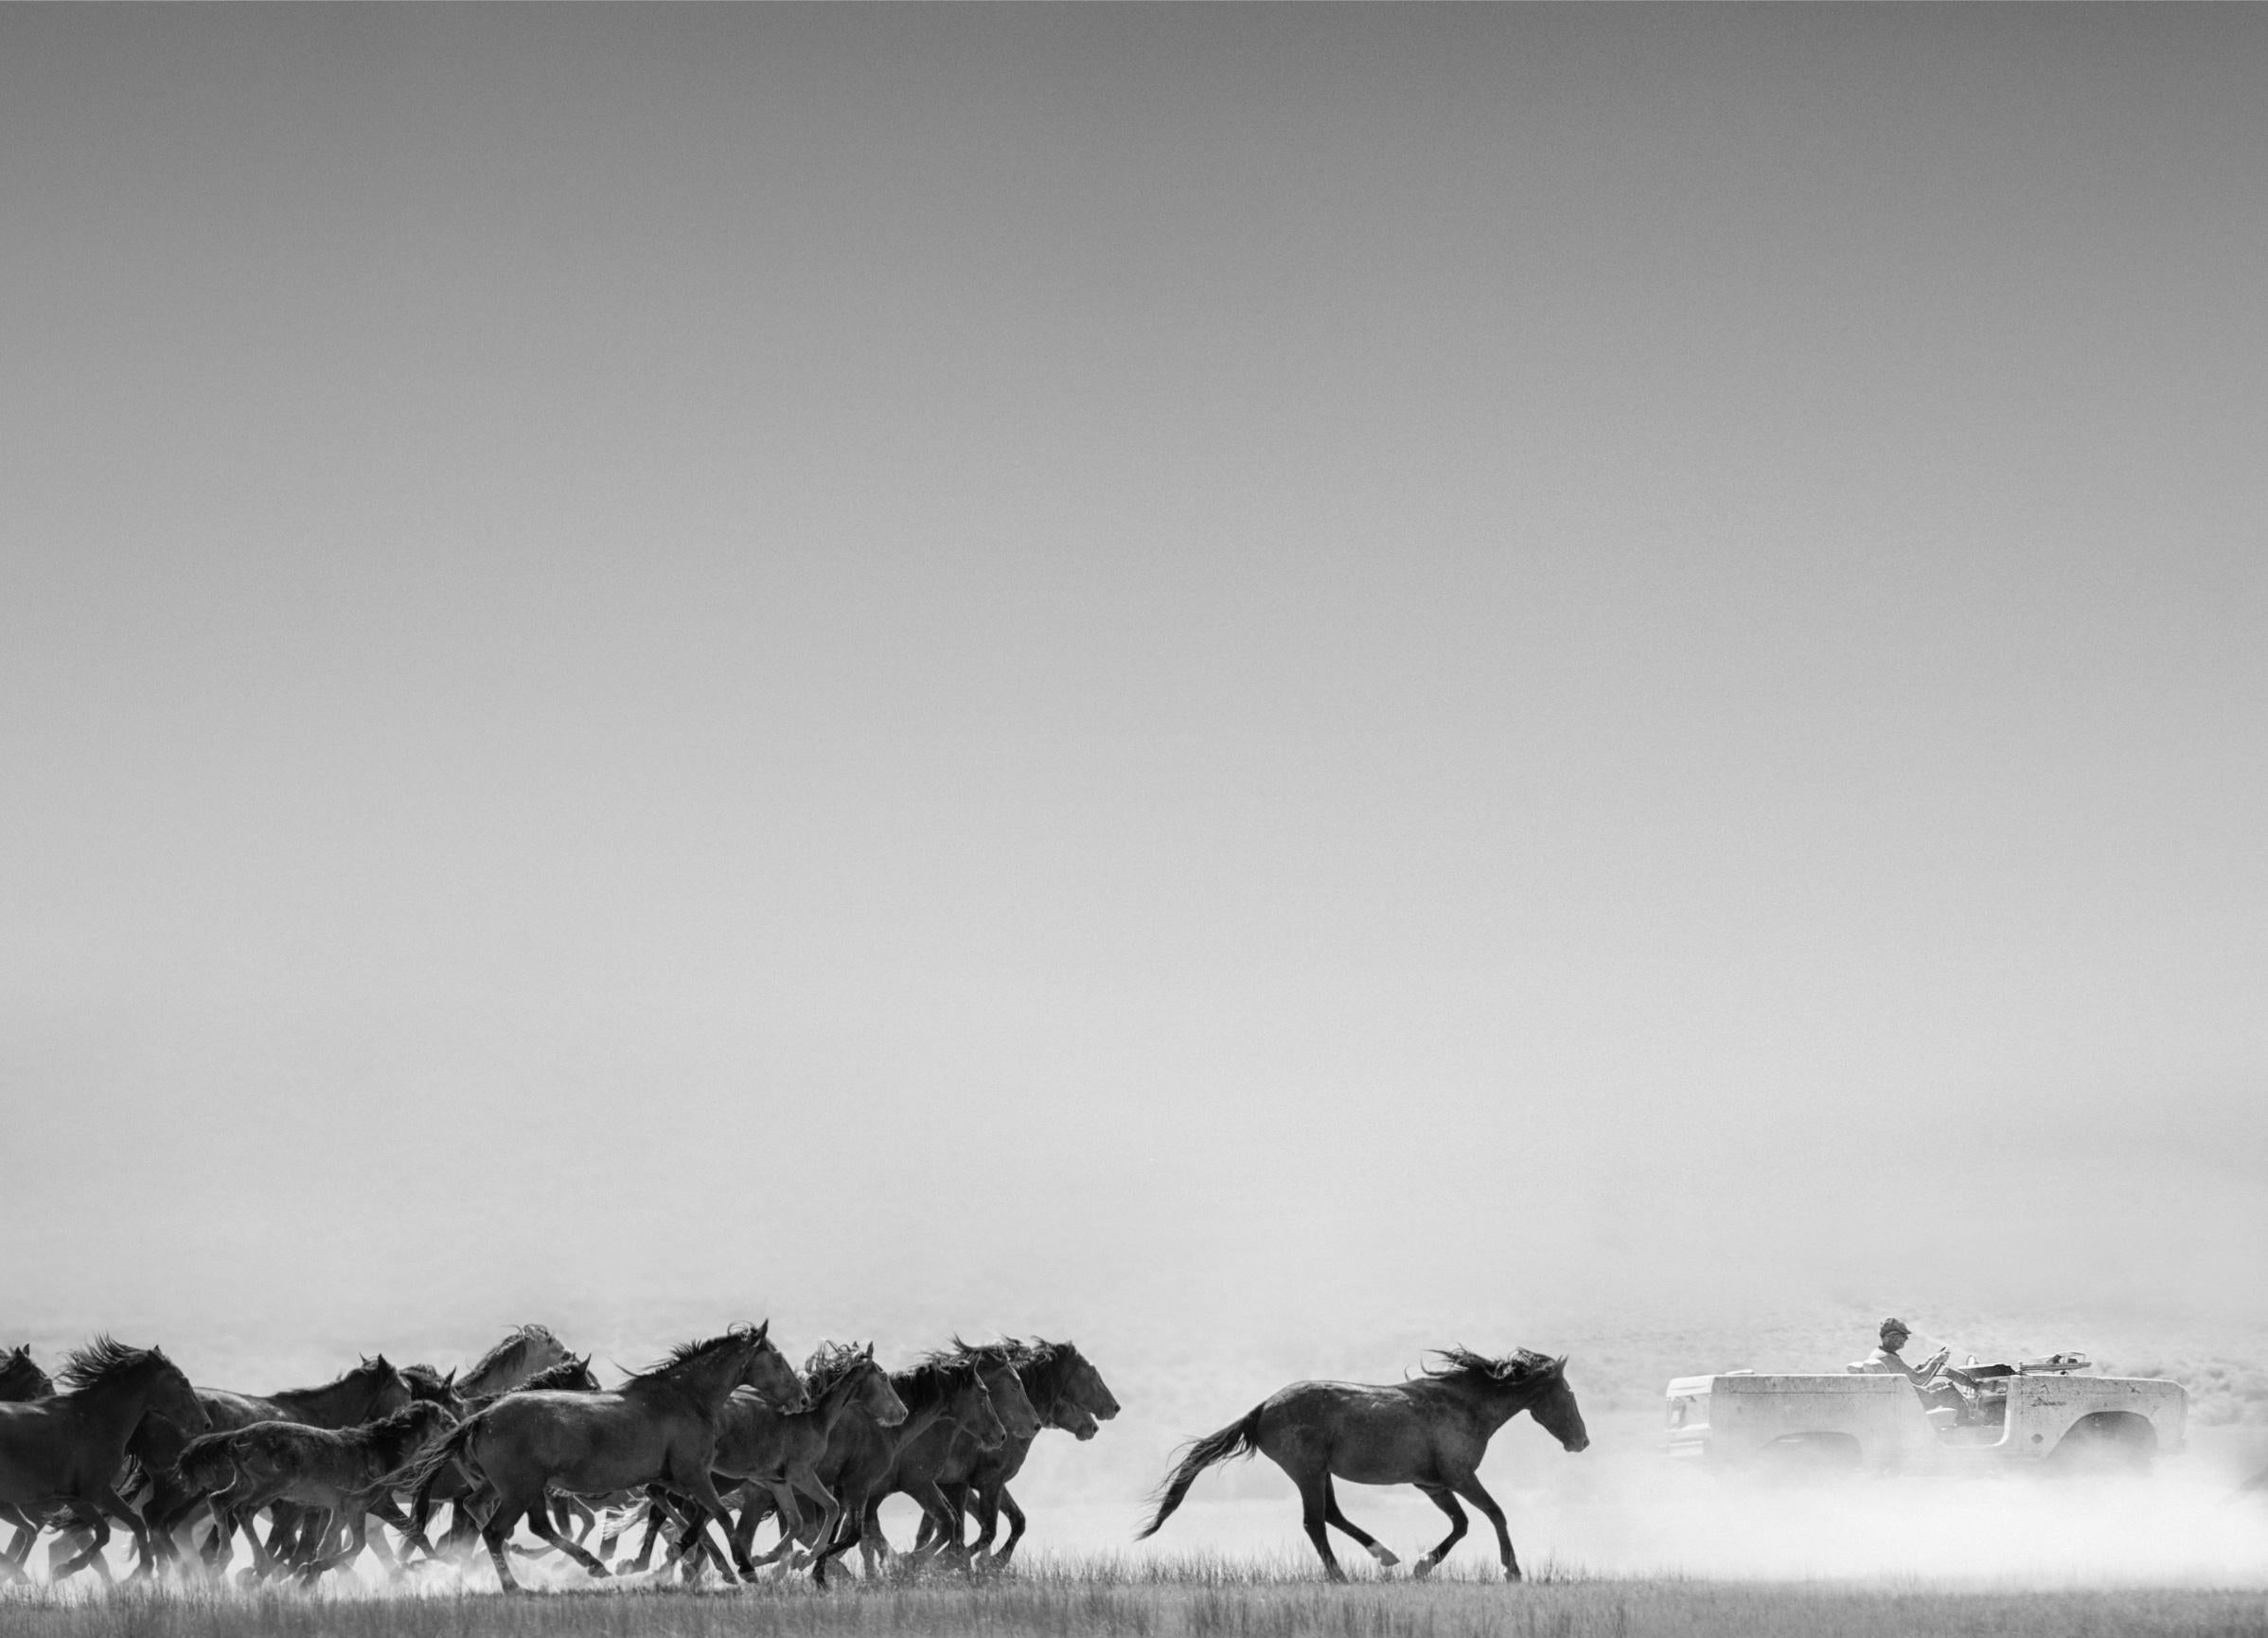 Shane Russeck Black and White Photograph - AMERICAN HORSE POWER 40x60 Photography Wild Horses Mustangs FORD BRONCO ICON